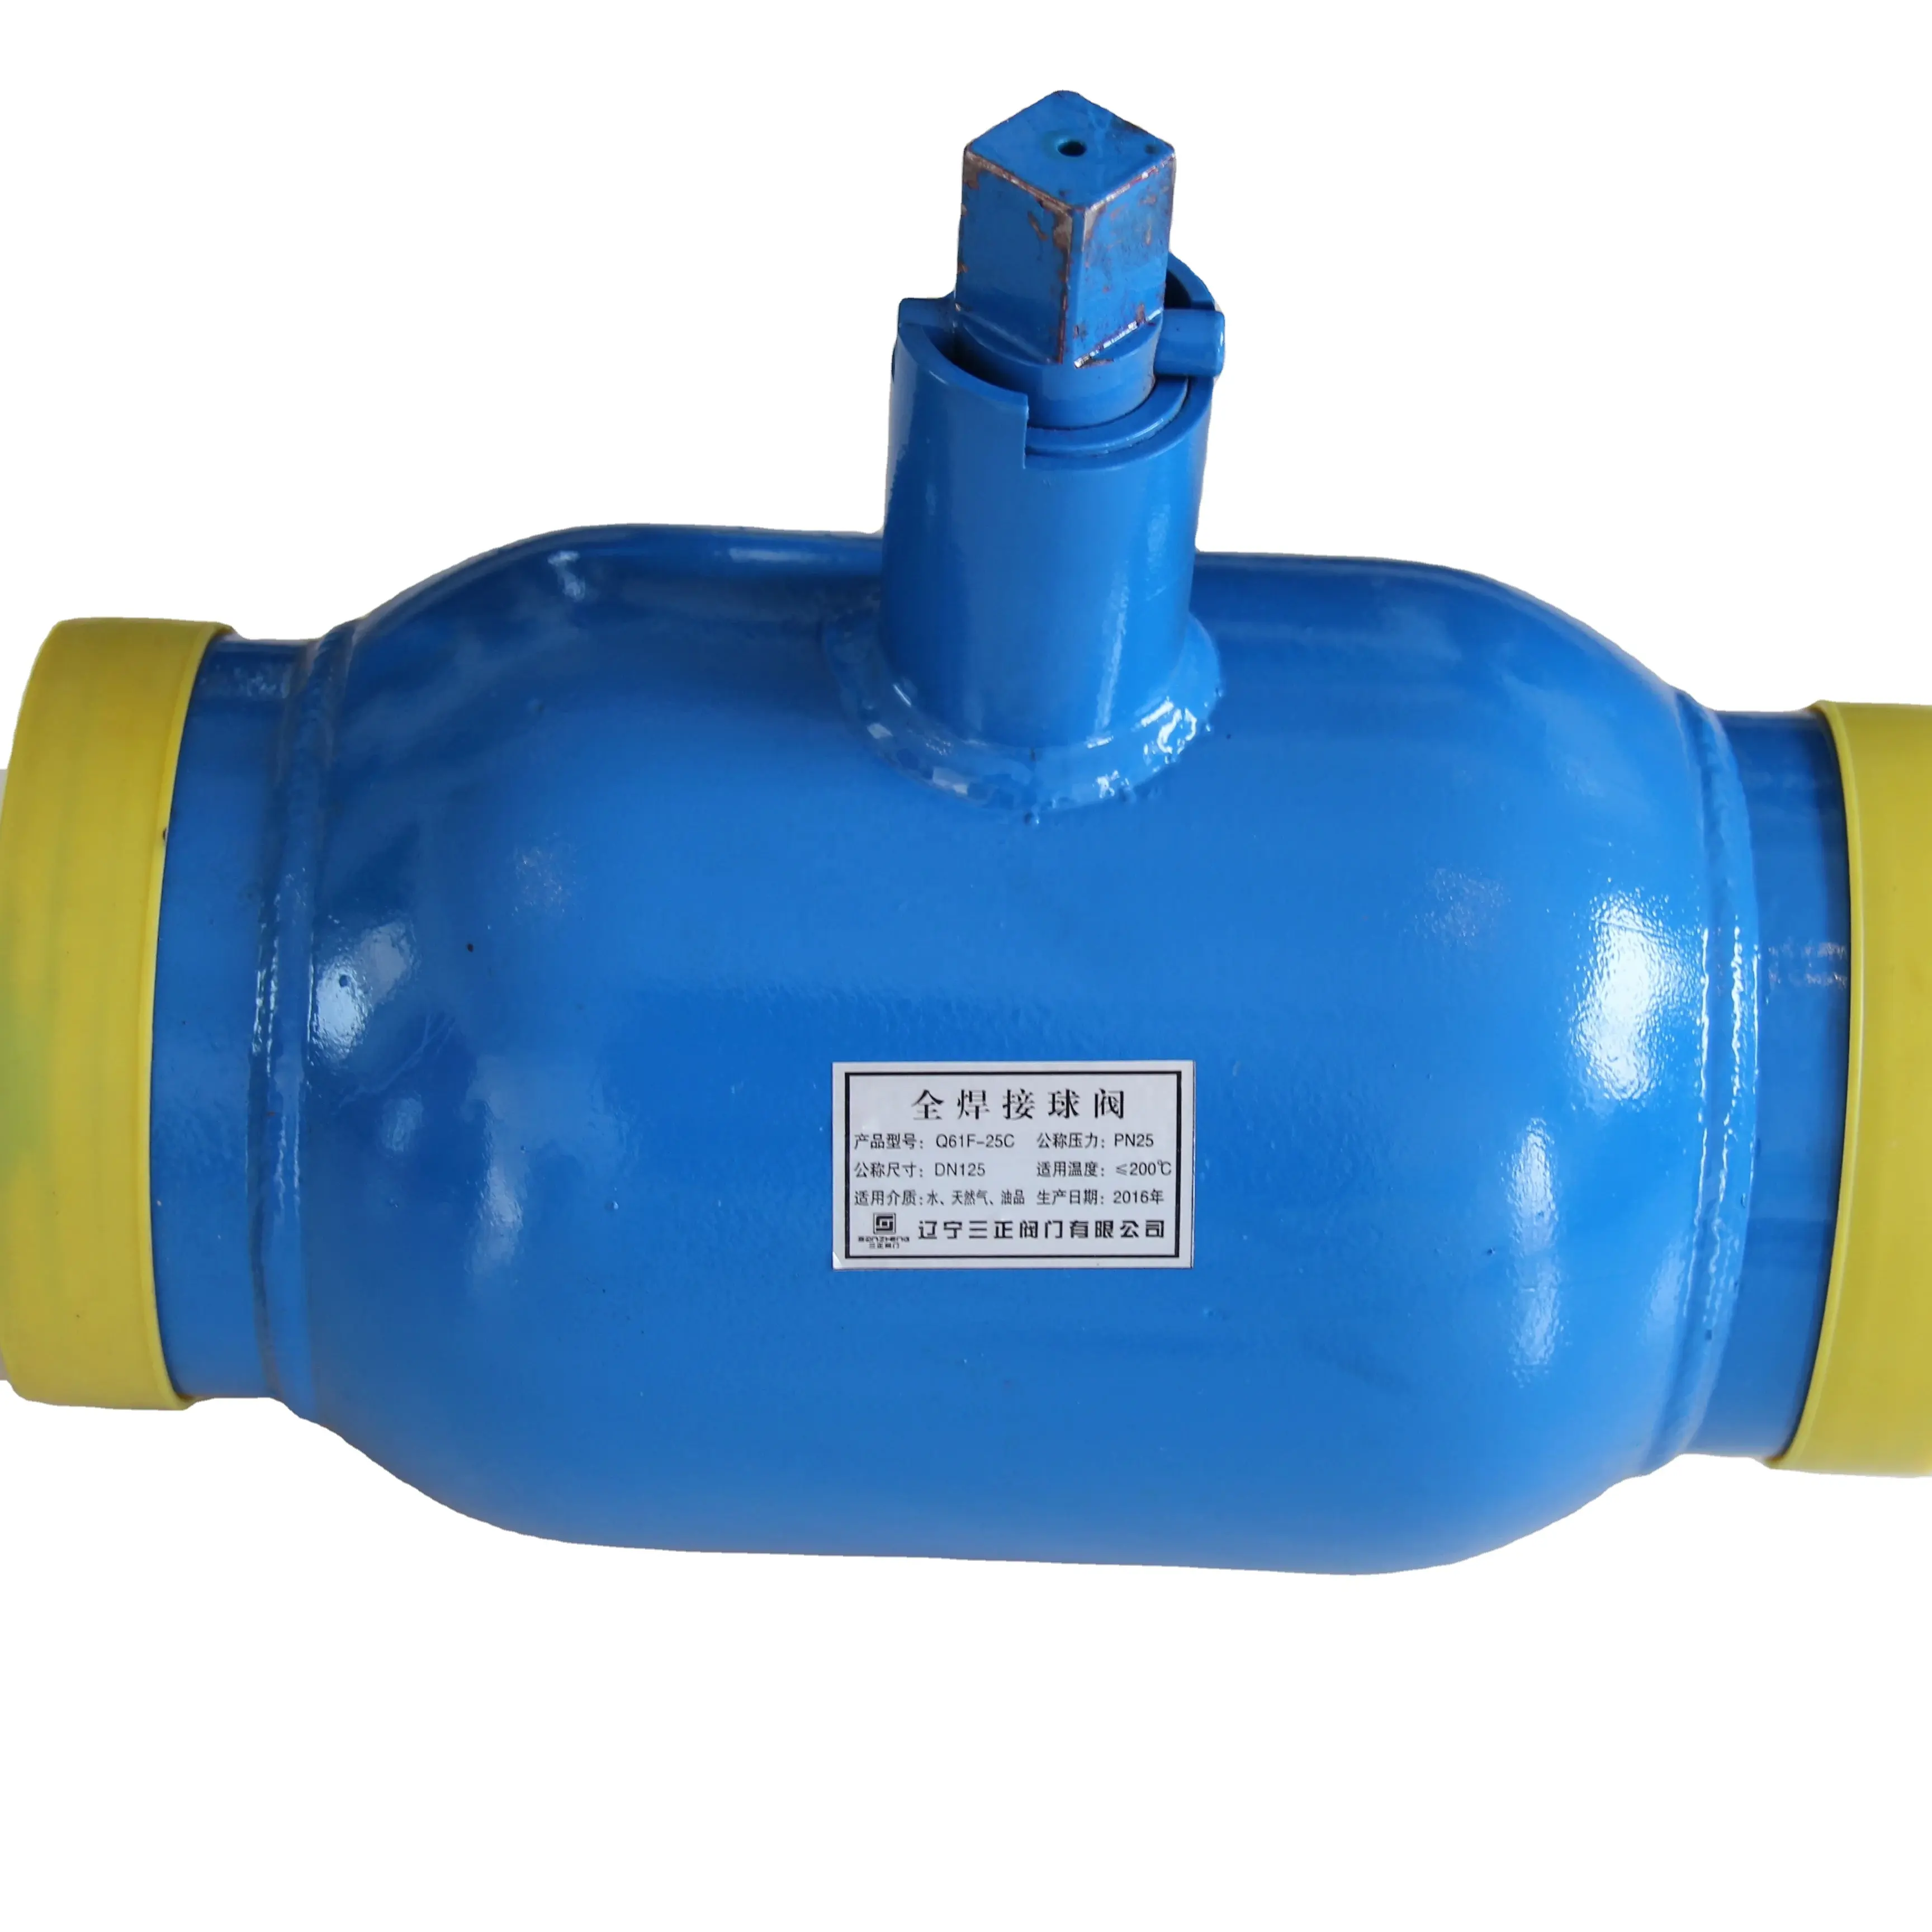 STAINLESS STEEL SOFT SEAL REDUCED DIAMETER TURBINE BALL VALVE Q367F DN 700 WATER/GAS WITH LOW PRESSURE PRODUCED IN LIAONING